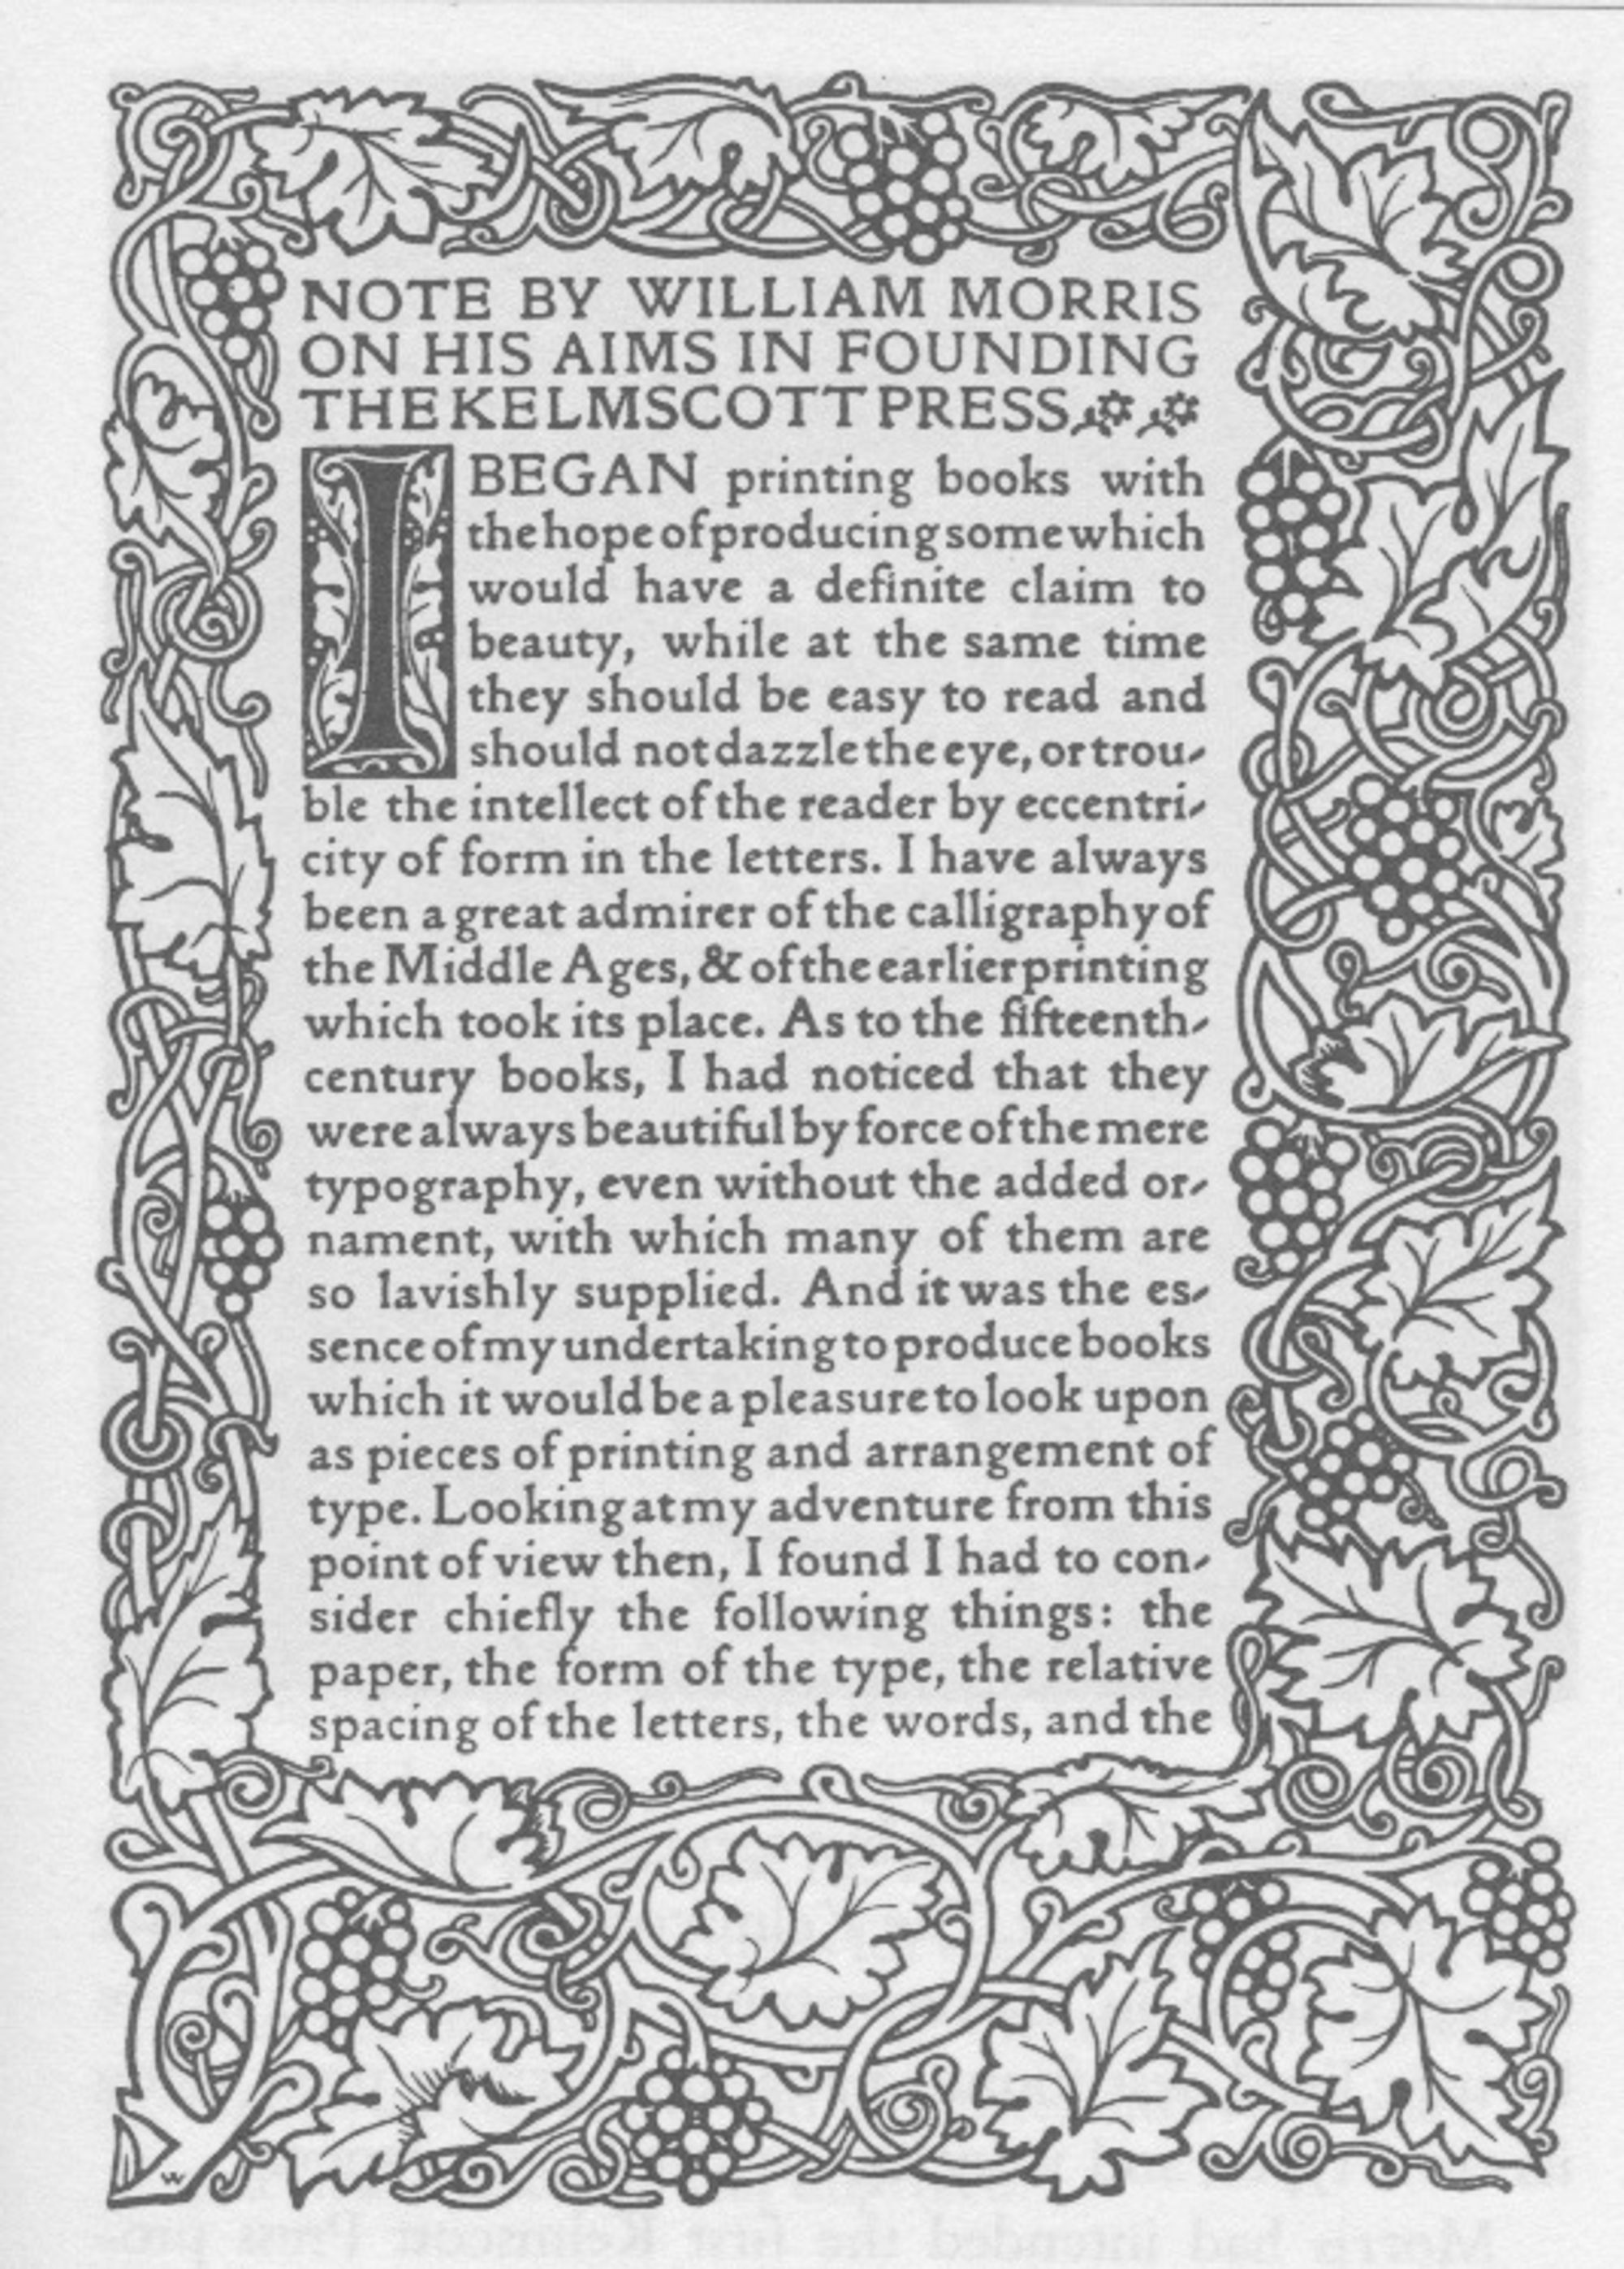 A Note by William Morris on His Aims in Founding the Kelmscott Press, Victorian Bibliomania catalogue no. 21, 1898